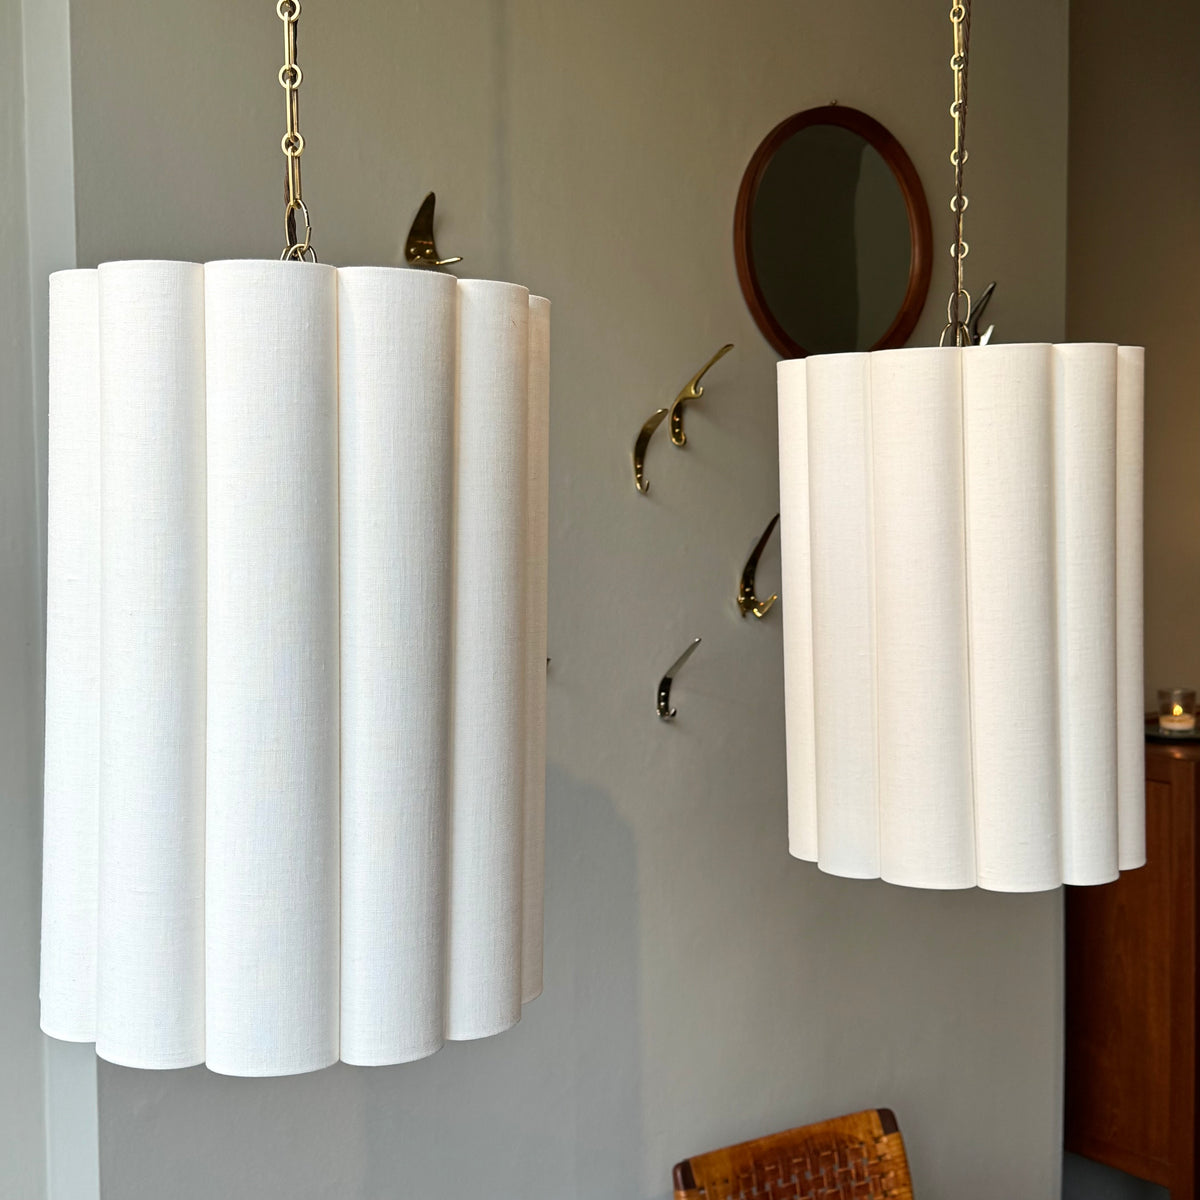 Large Scalloped Pendant Light/ Italy, 1960s (1 of 1)